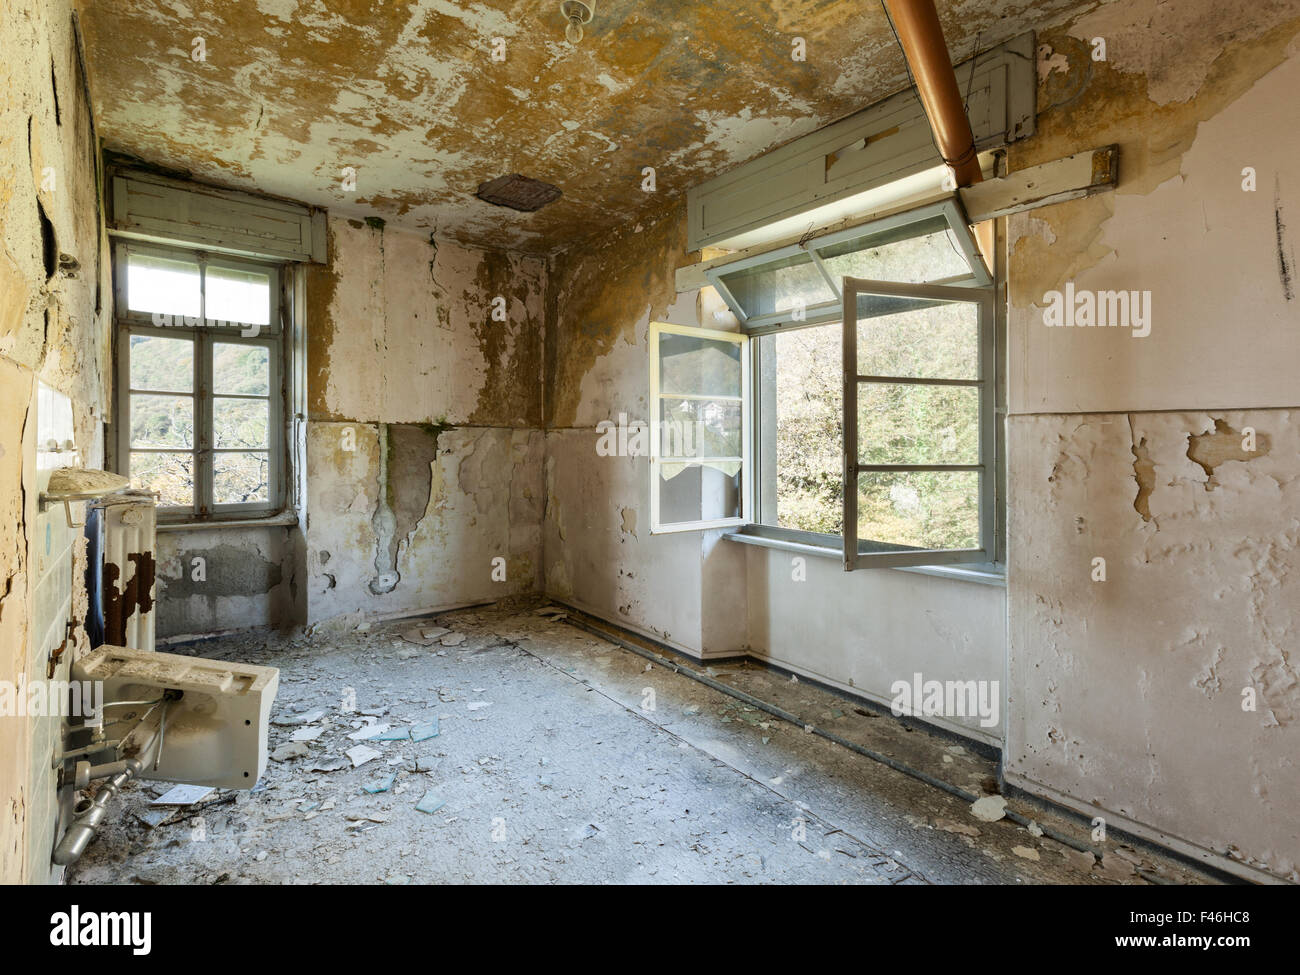 old destroyed building, room with window Stock Photo